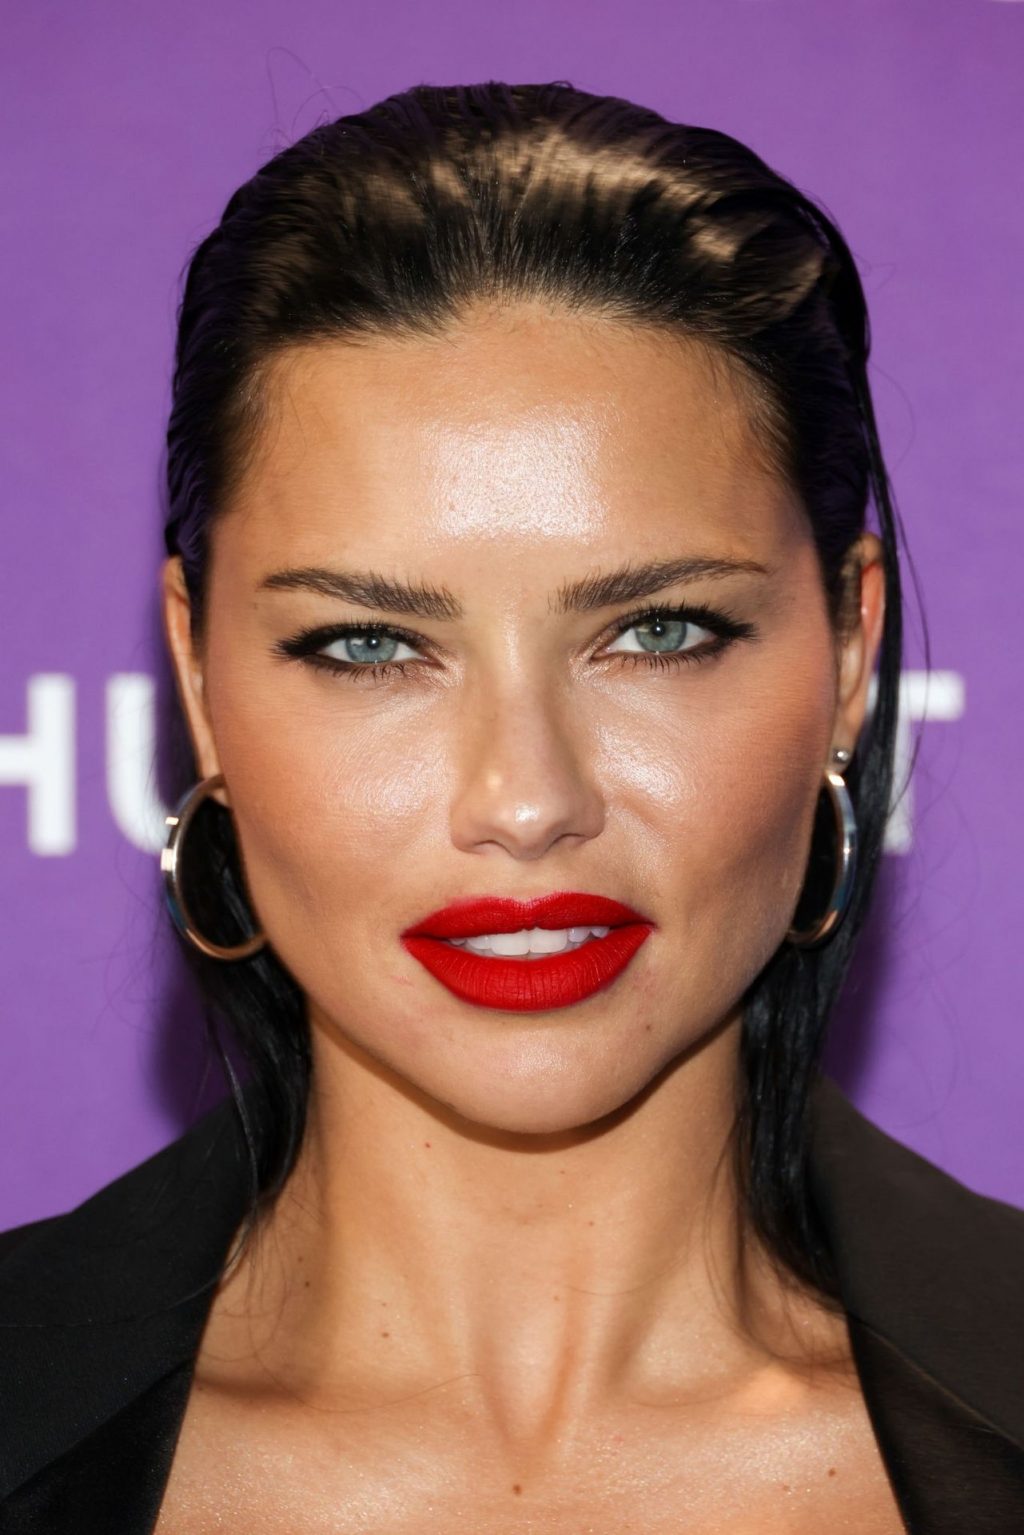 Adriana Lima Flaunts Her Cleavage at the Launch Party for the Hublot x DJ Snake Watch (31 Photos) [Updated 09/04/21]